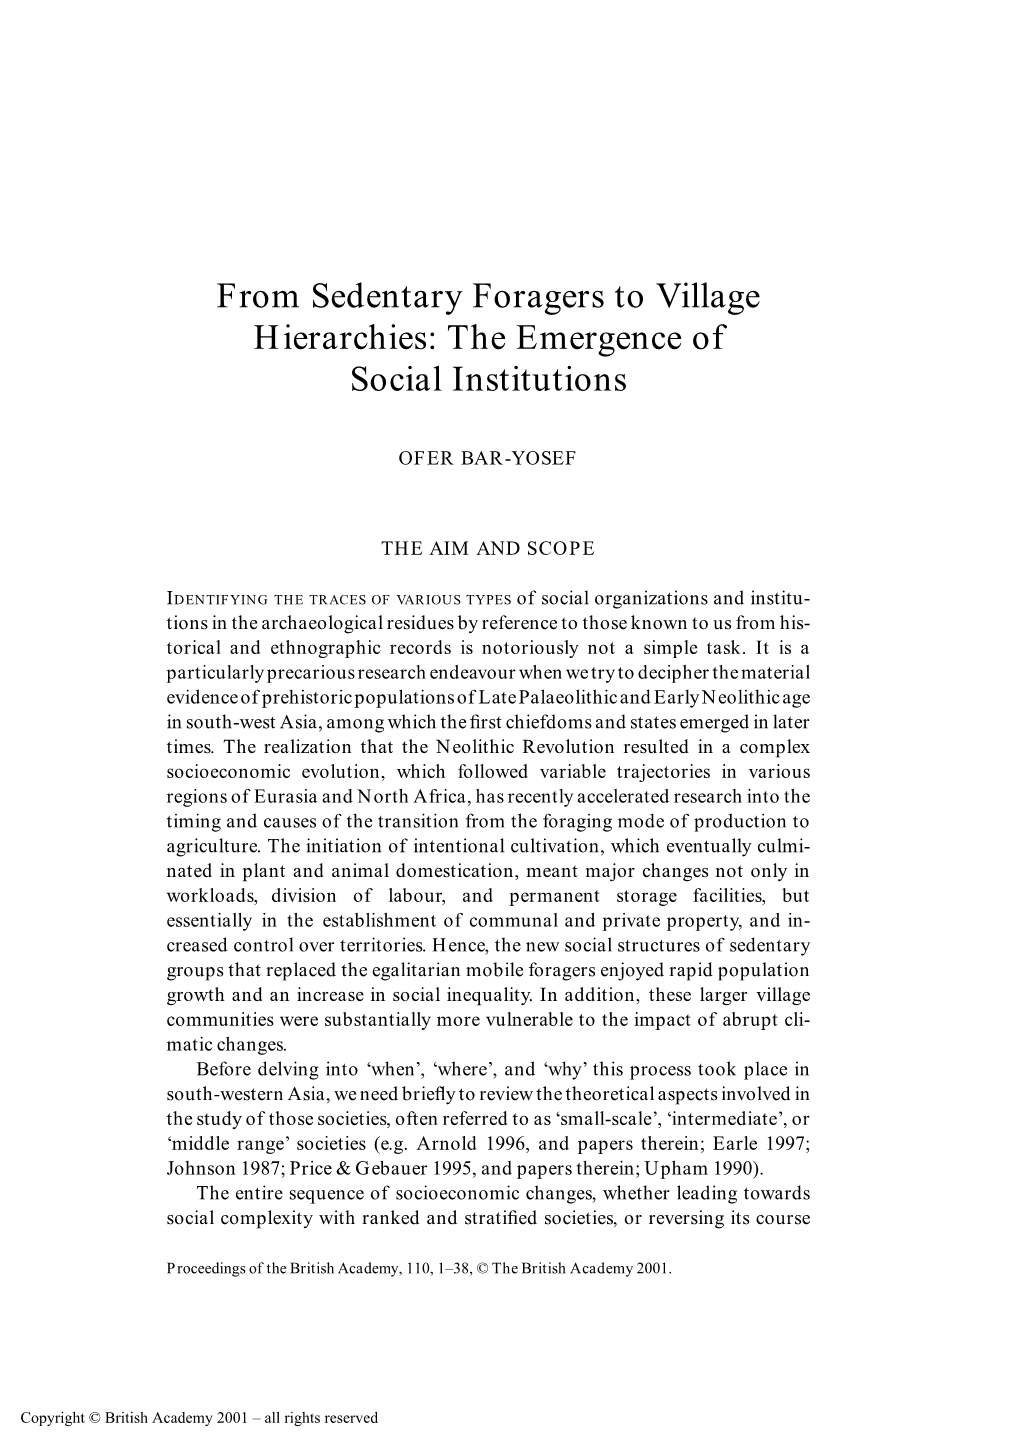 From Sedentary Foragers to Village Hierarchies: the Emergence of Social Institutions